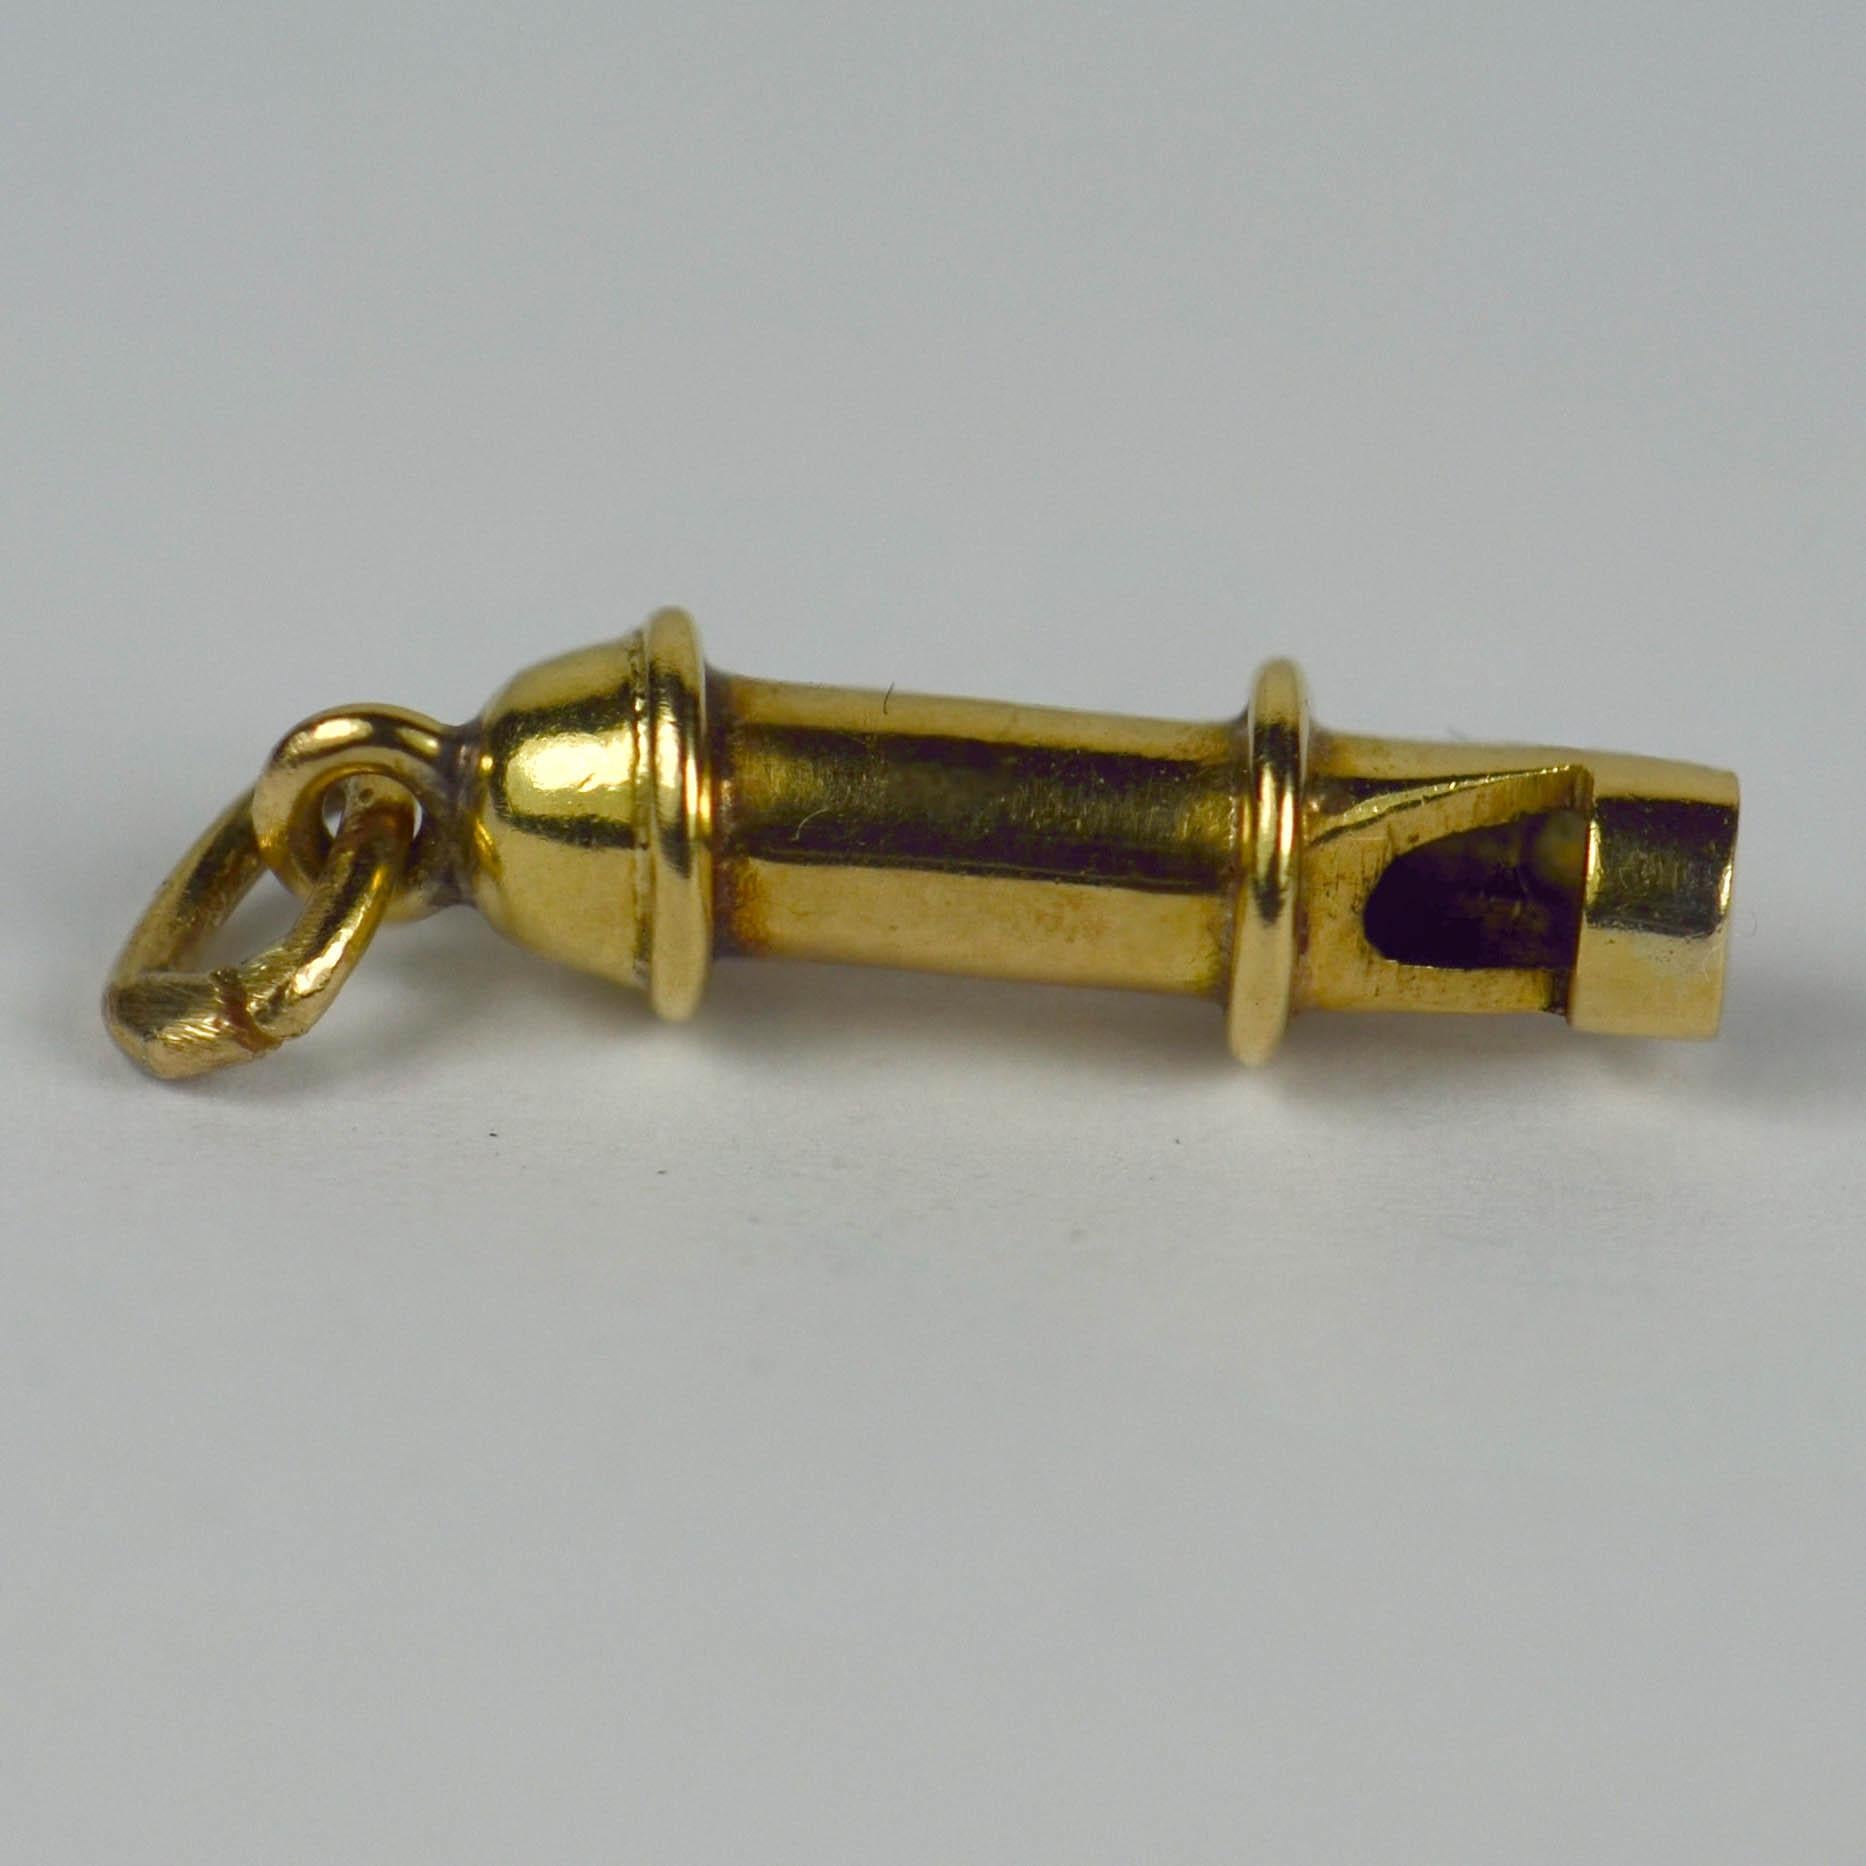 An 18 karat yellow gold charm pendant designed as a whistle.
Unmarked but tested as 18 karat gold.

Dimensions: 2 x 0.5 x 0.5 cm
Weight: 0.98 grams